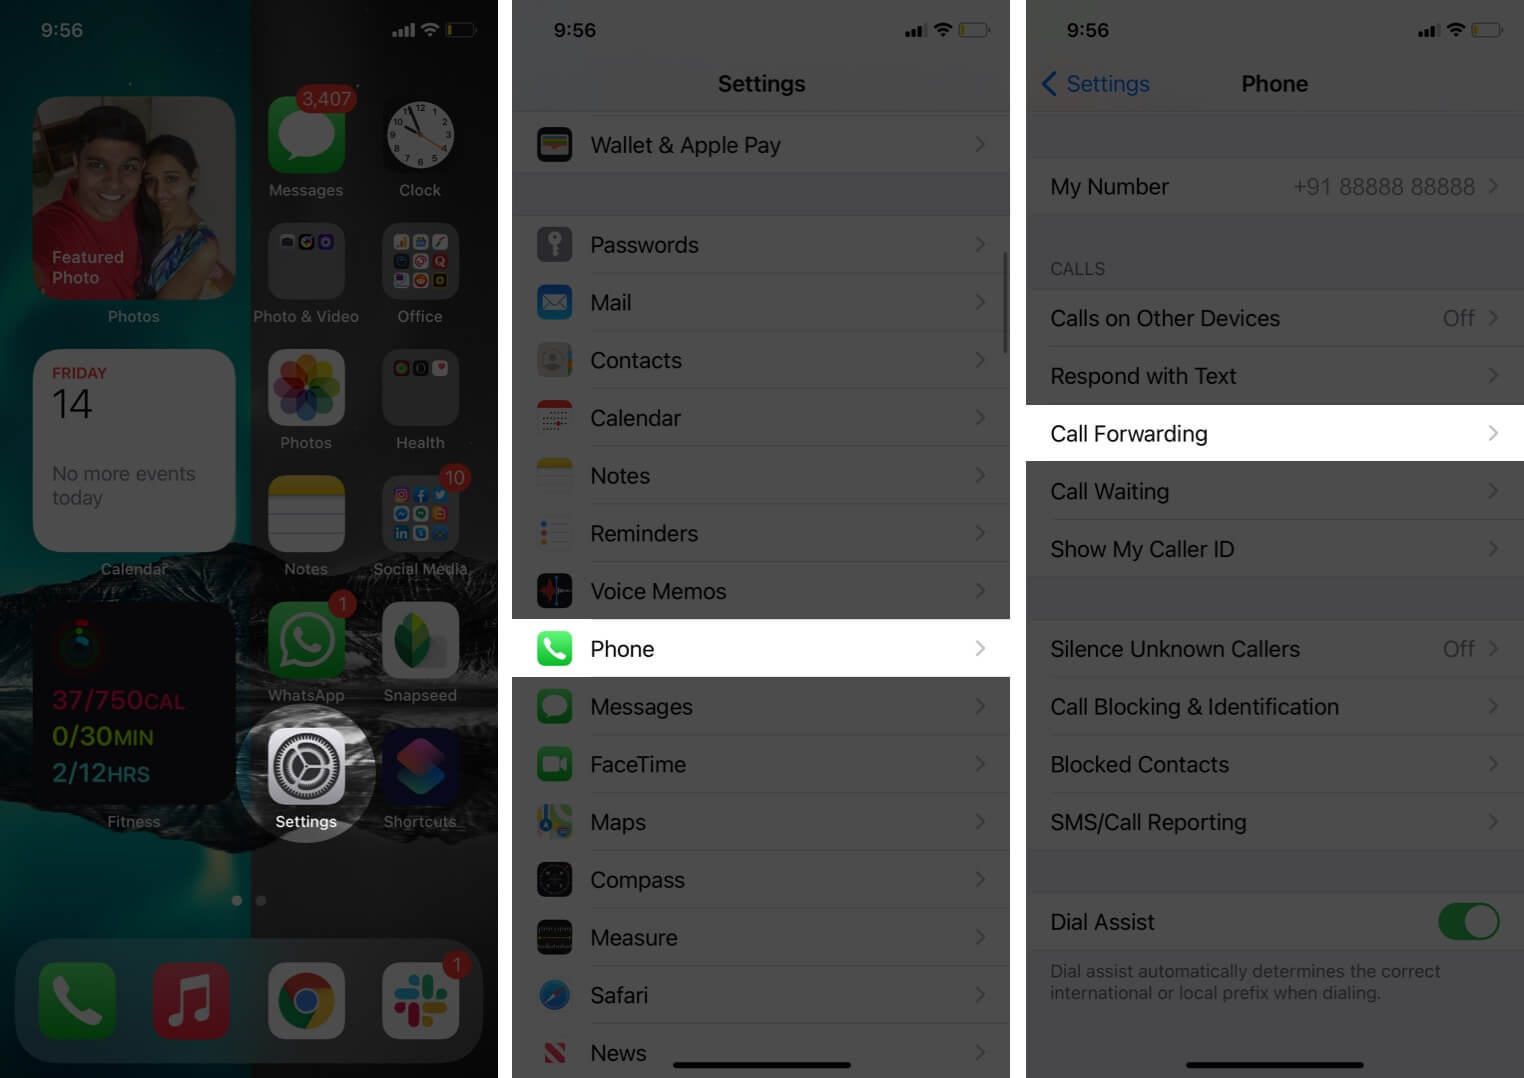 open settings tap on phone and select call forwarding on iphone